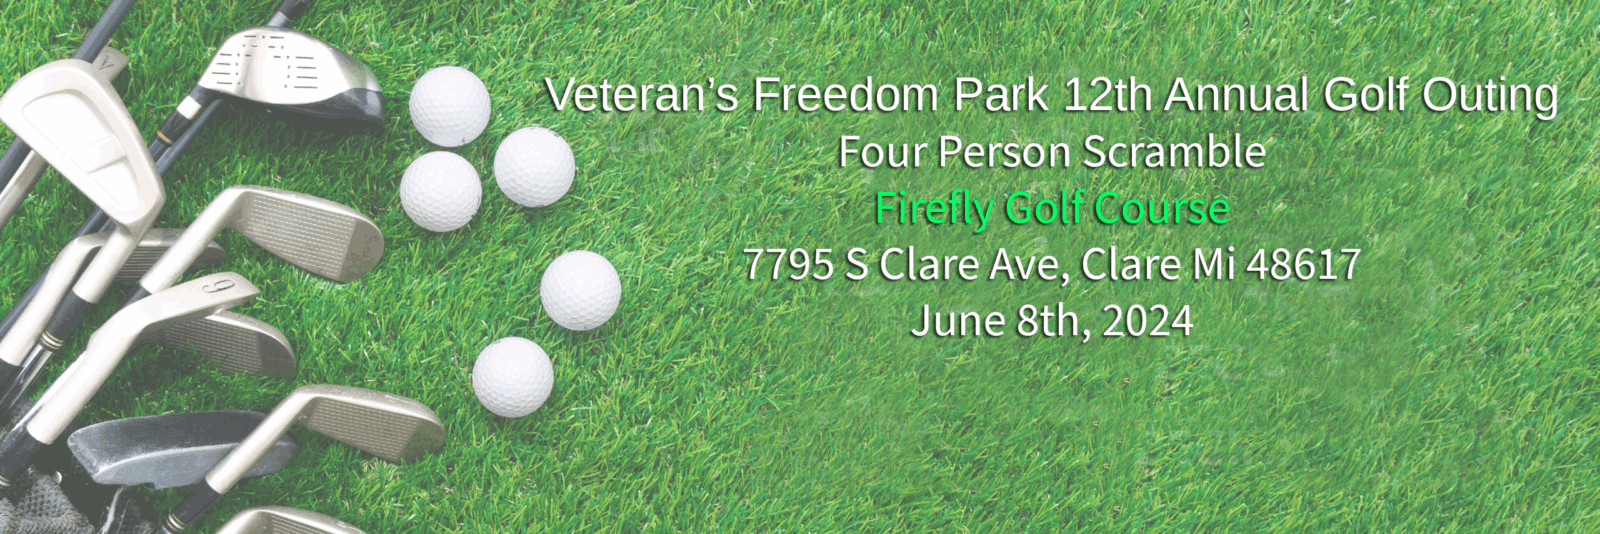 Veteran’s Freedom Park 12th Annual Golf Outing